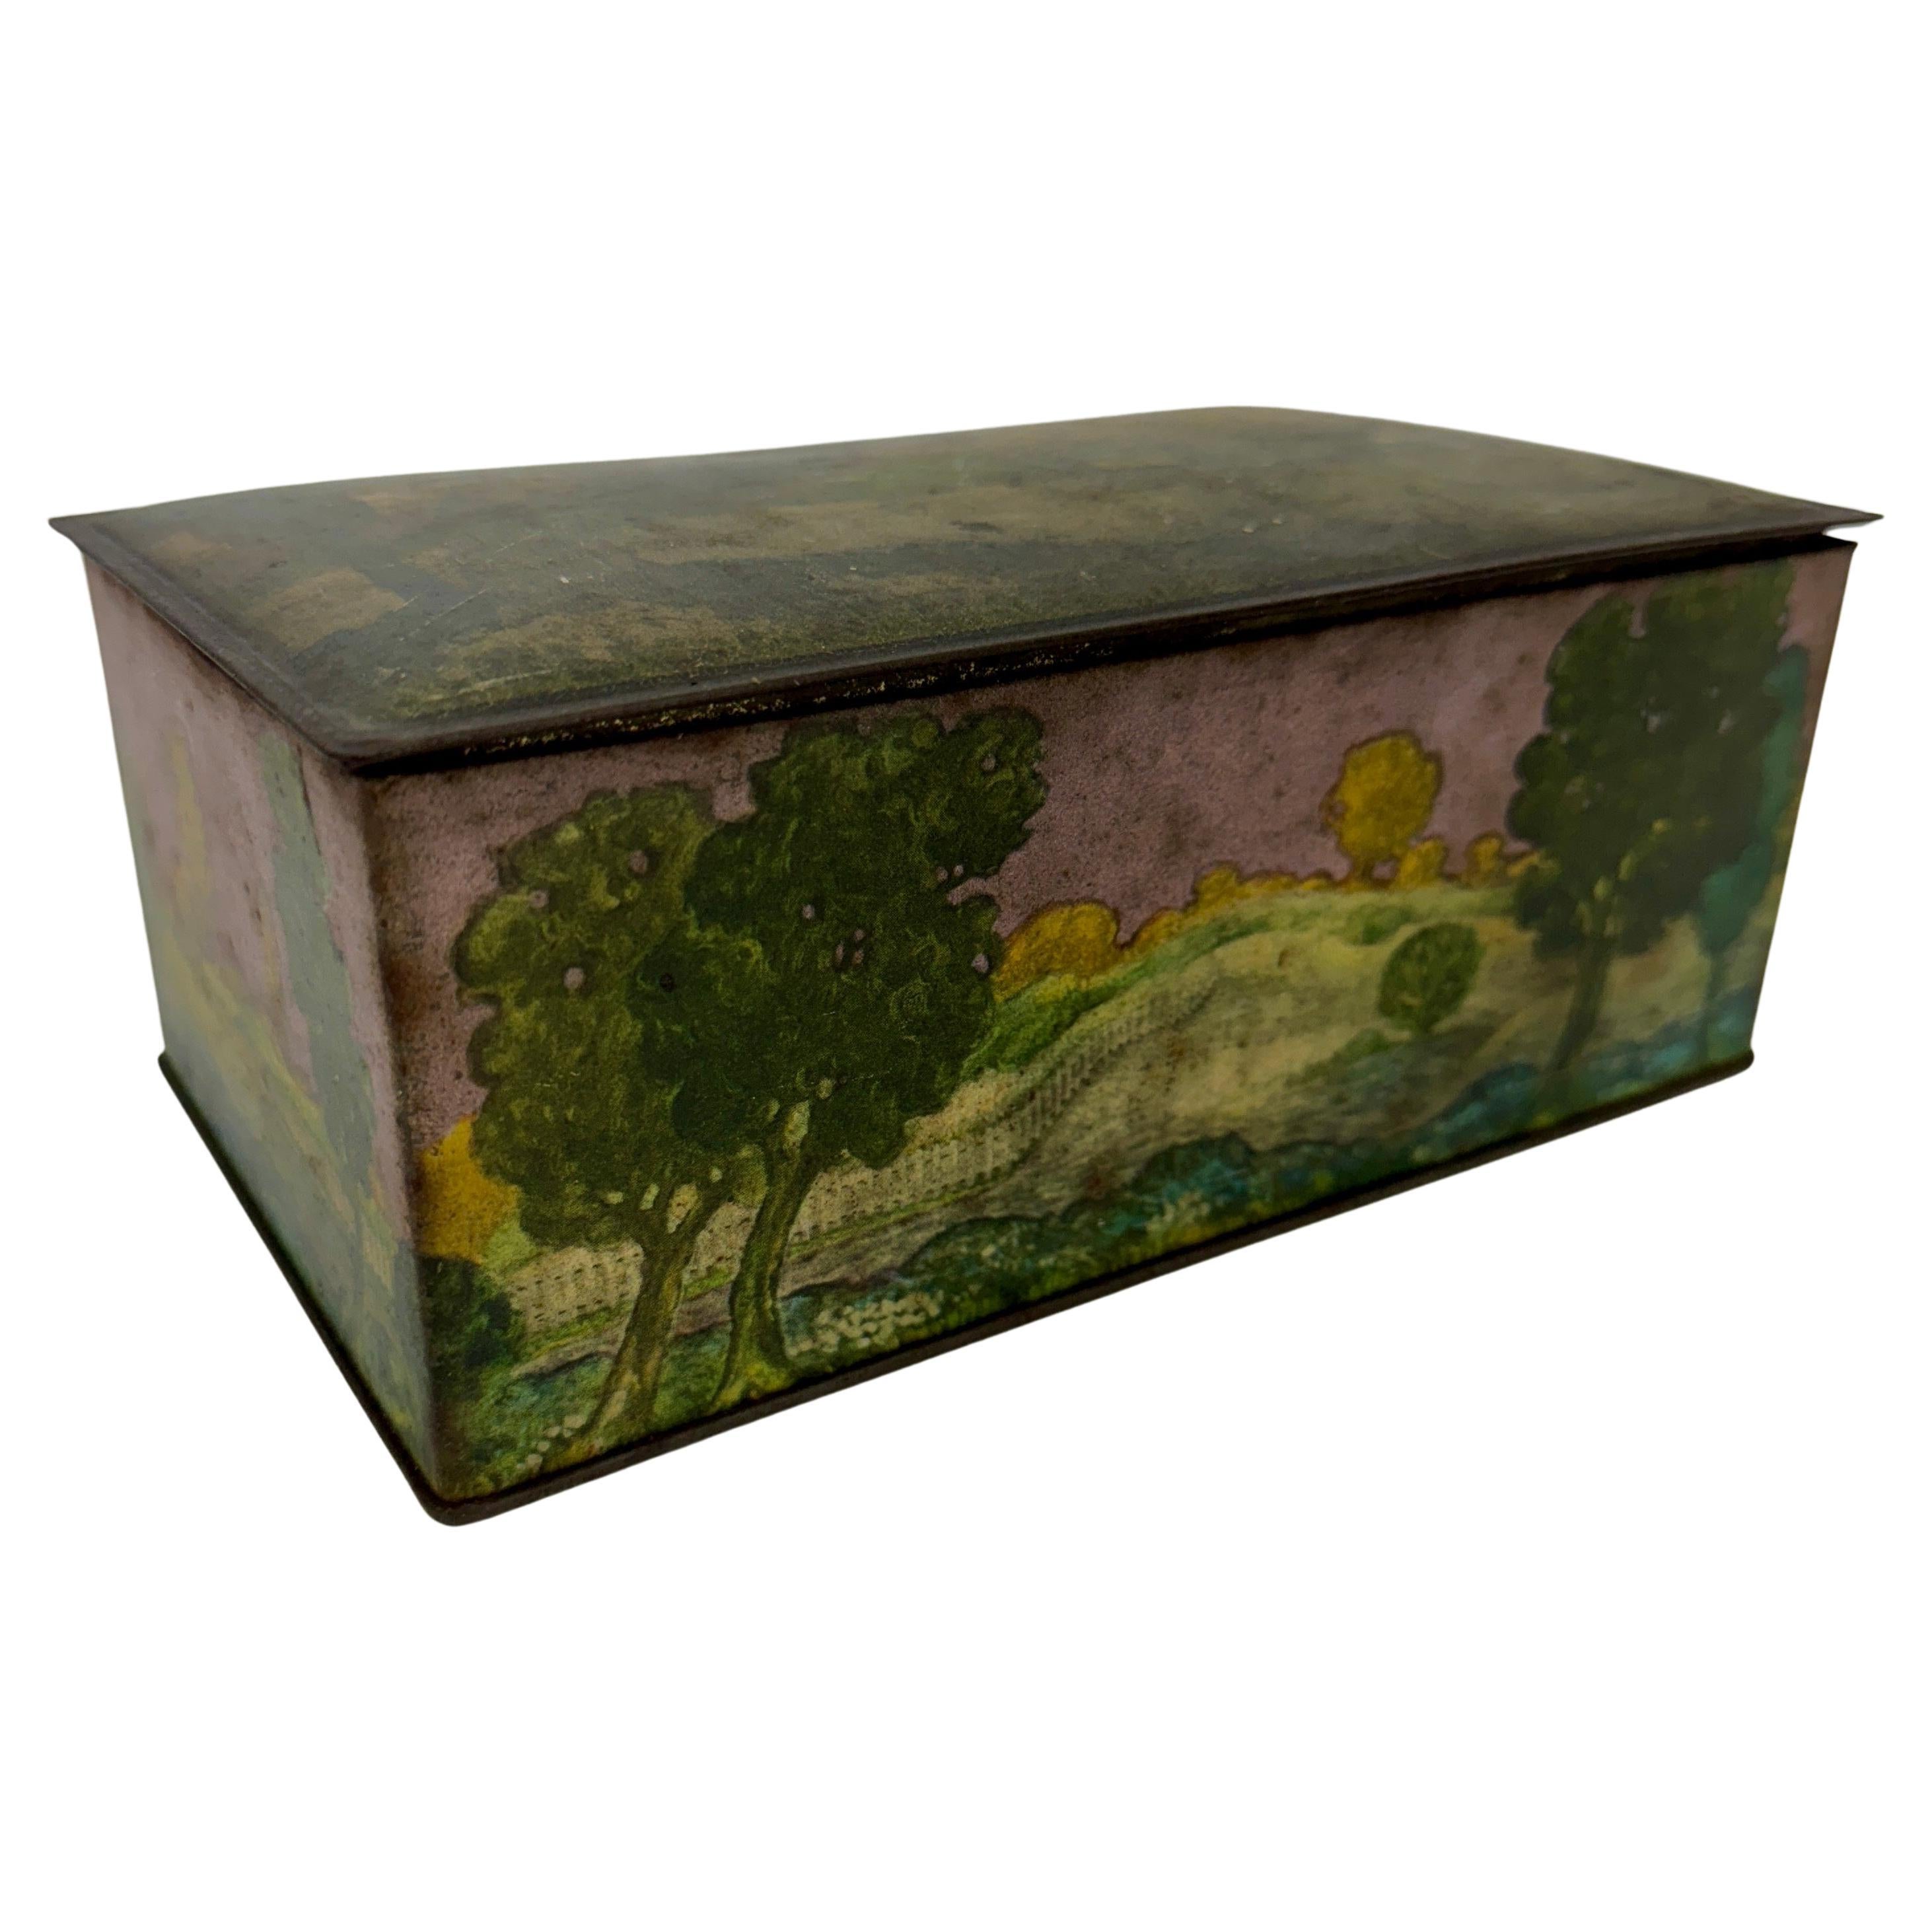 Canco Painted Tin Box with Landscape, circa....

Very charming vintage tin box depicting a serene landscape with trees, a building and a fence. Wonderful versatile piece to be used functionally or for display in any formal or informal setting. Great